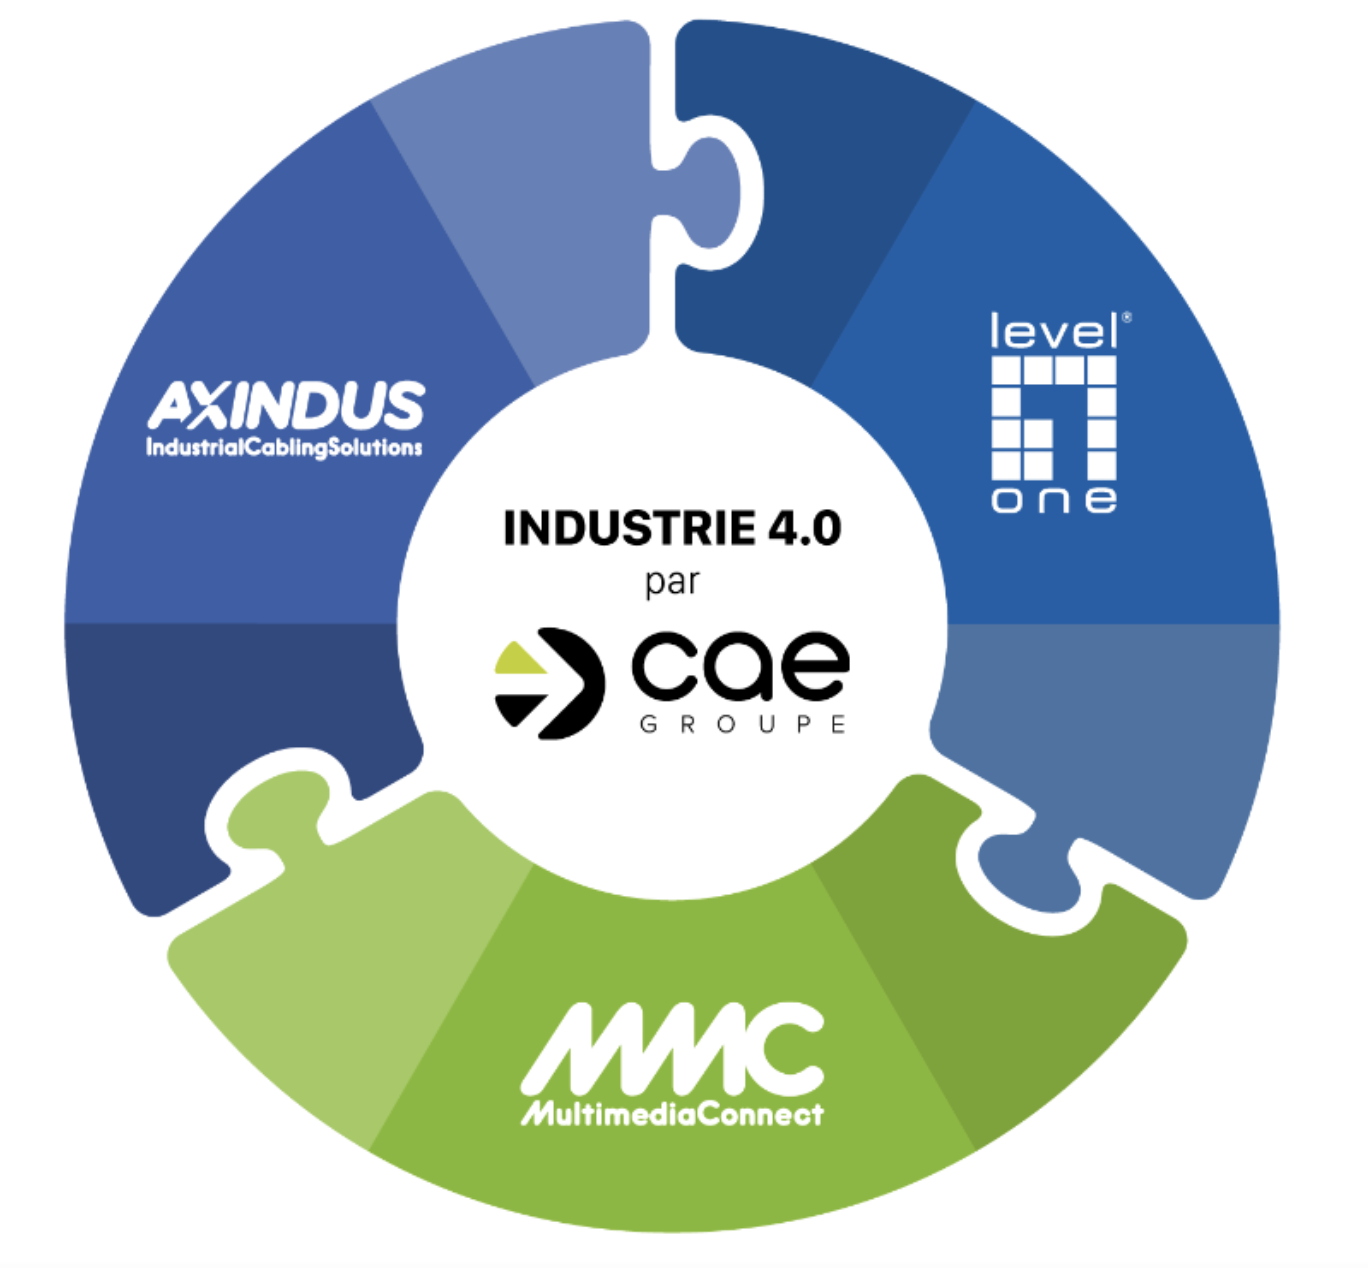 Axindus, MMC, Level one - industrie 4.0